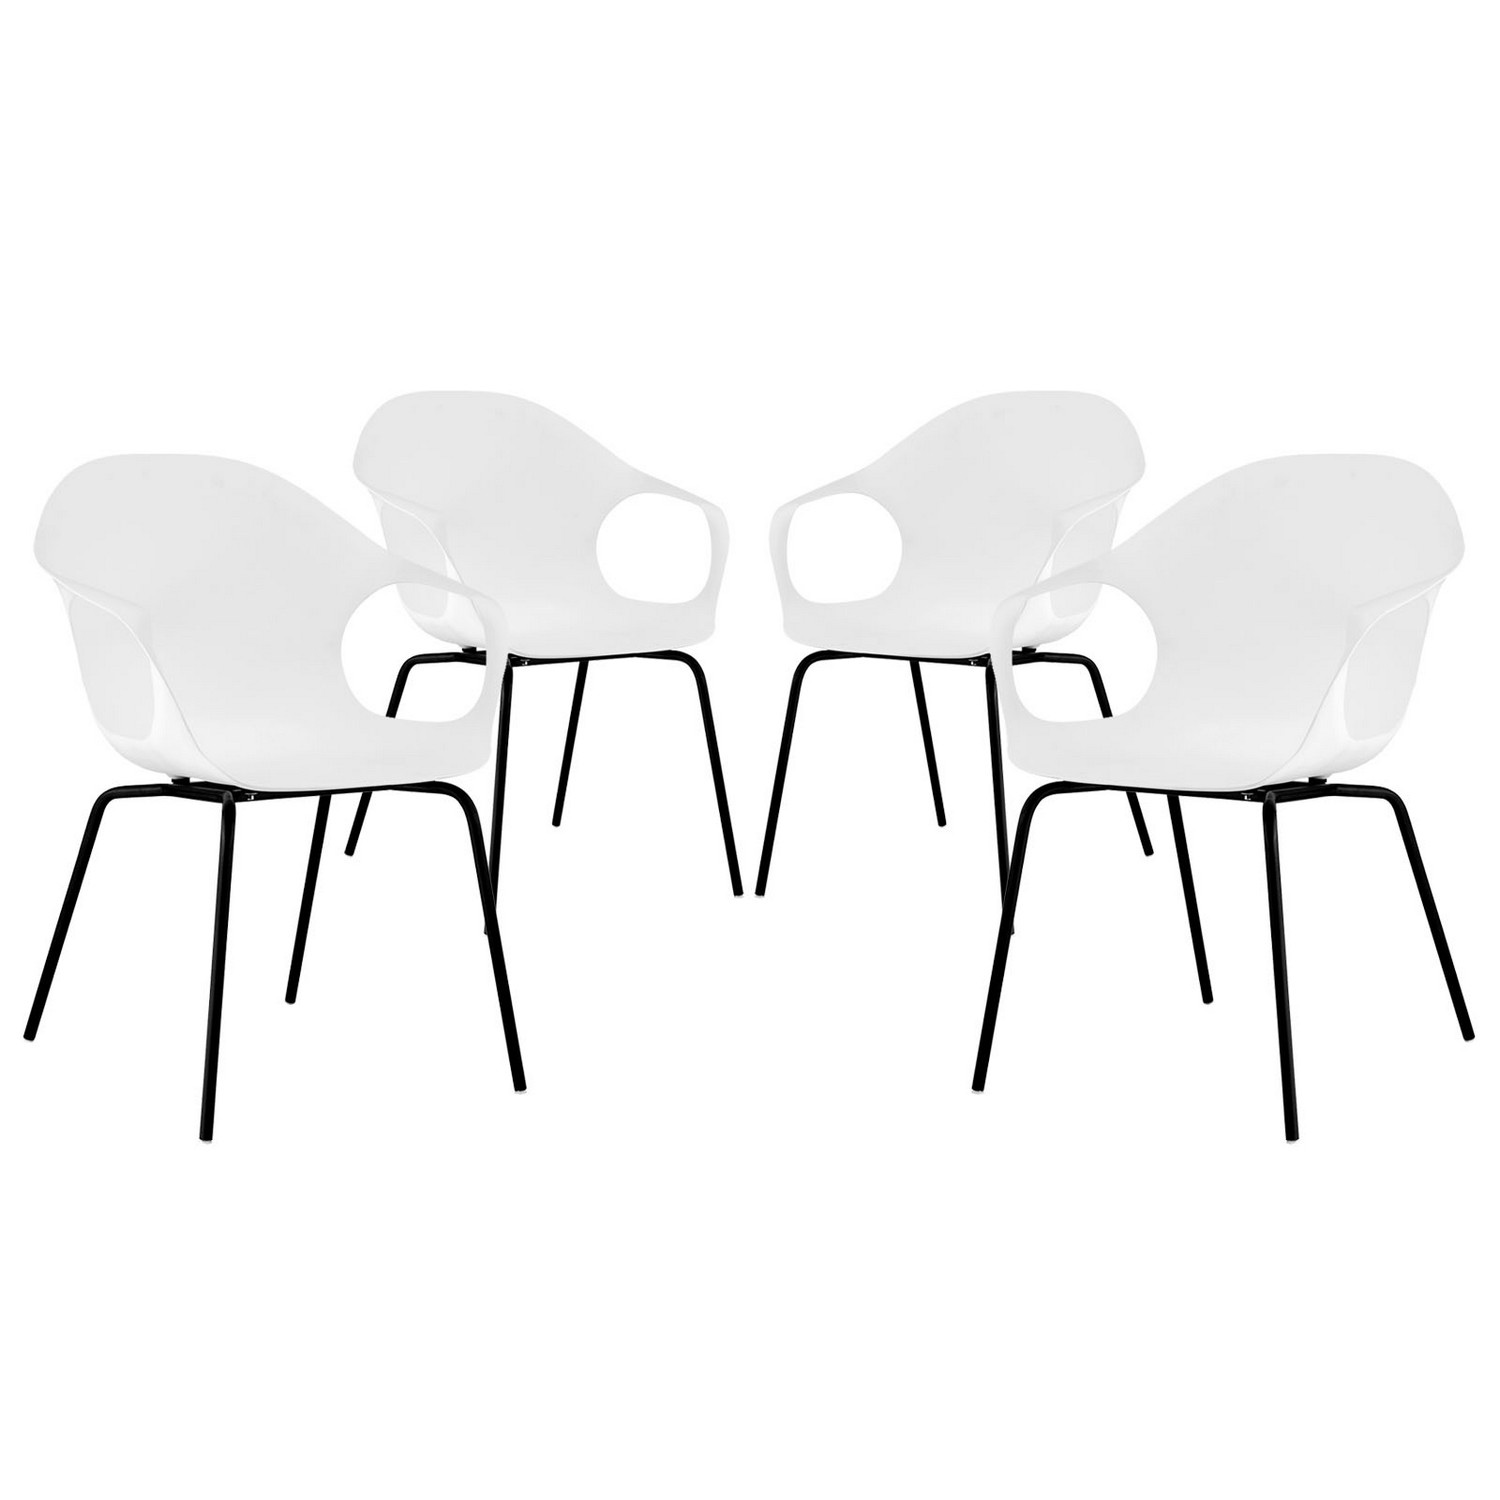 Modway Swerve Dining Chair - Set of 4 - White